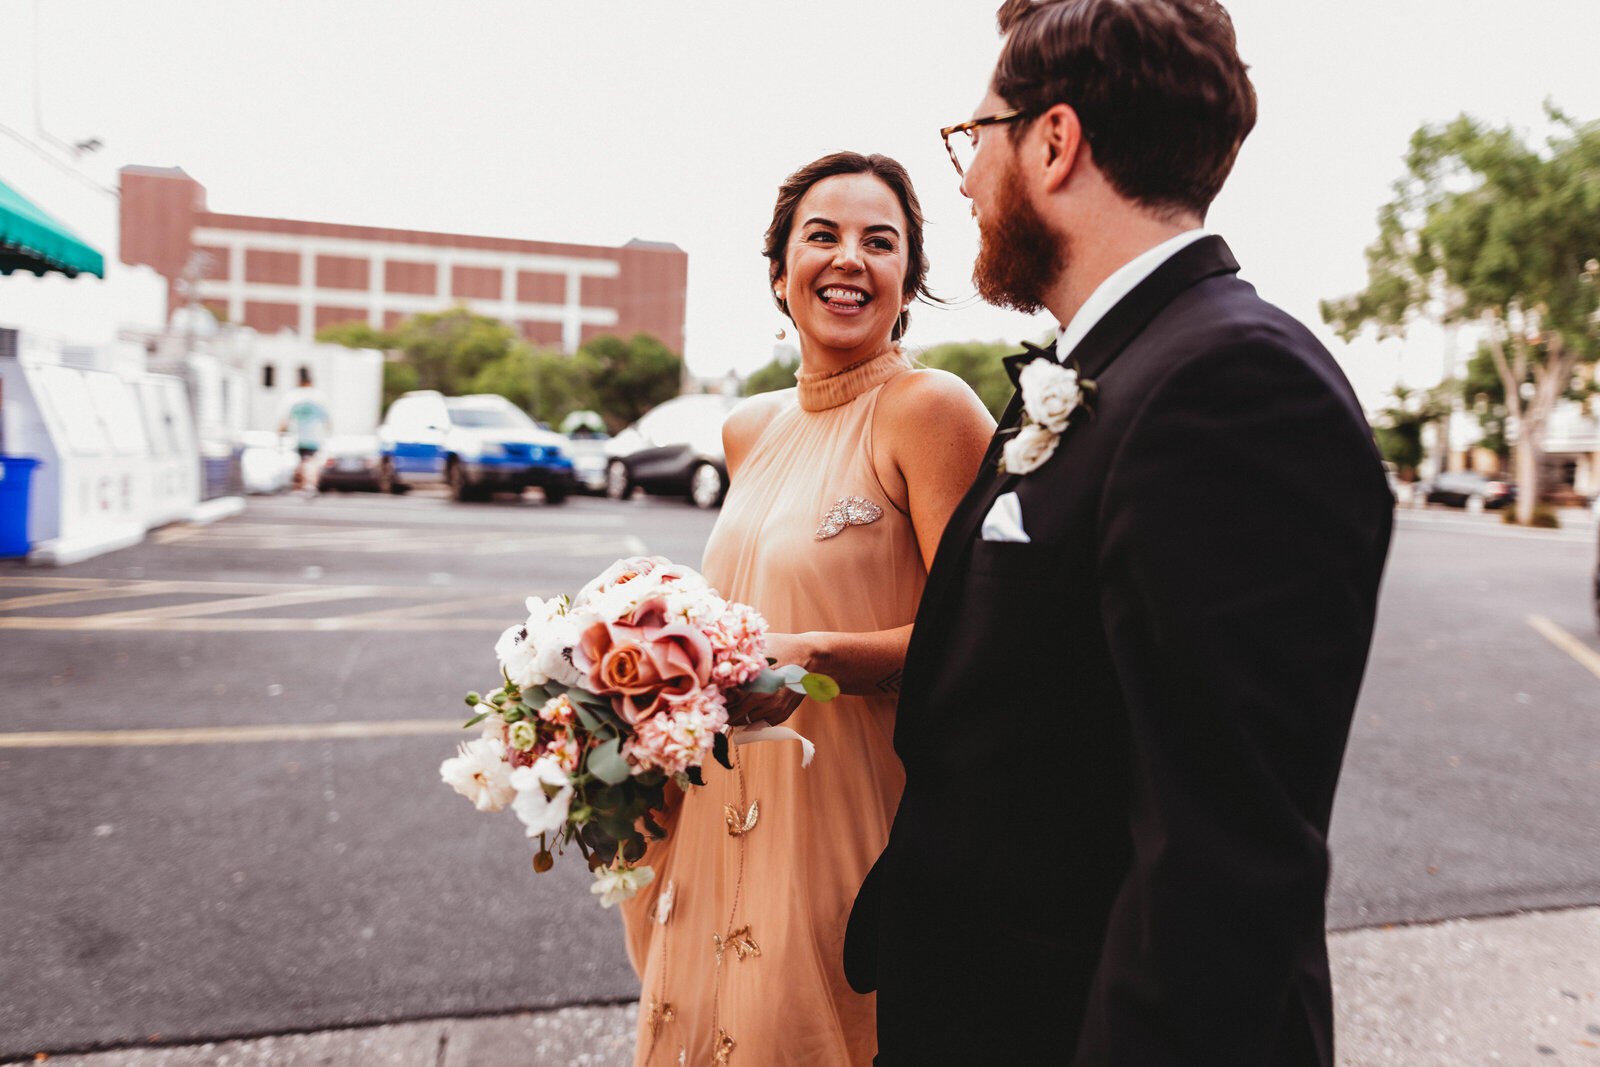 destination and travel photography to downtown Wilmington, North Carolina, wedding, couples portraiture small city vibes, tropical